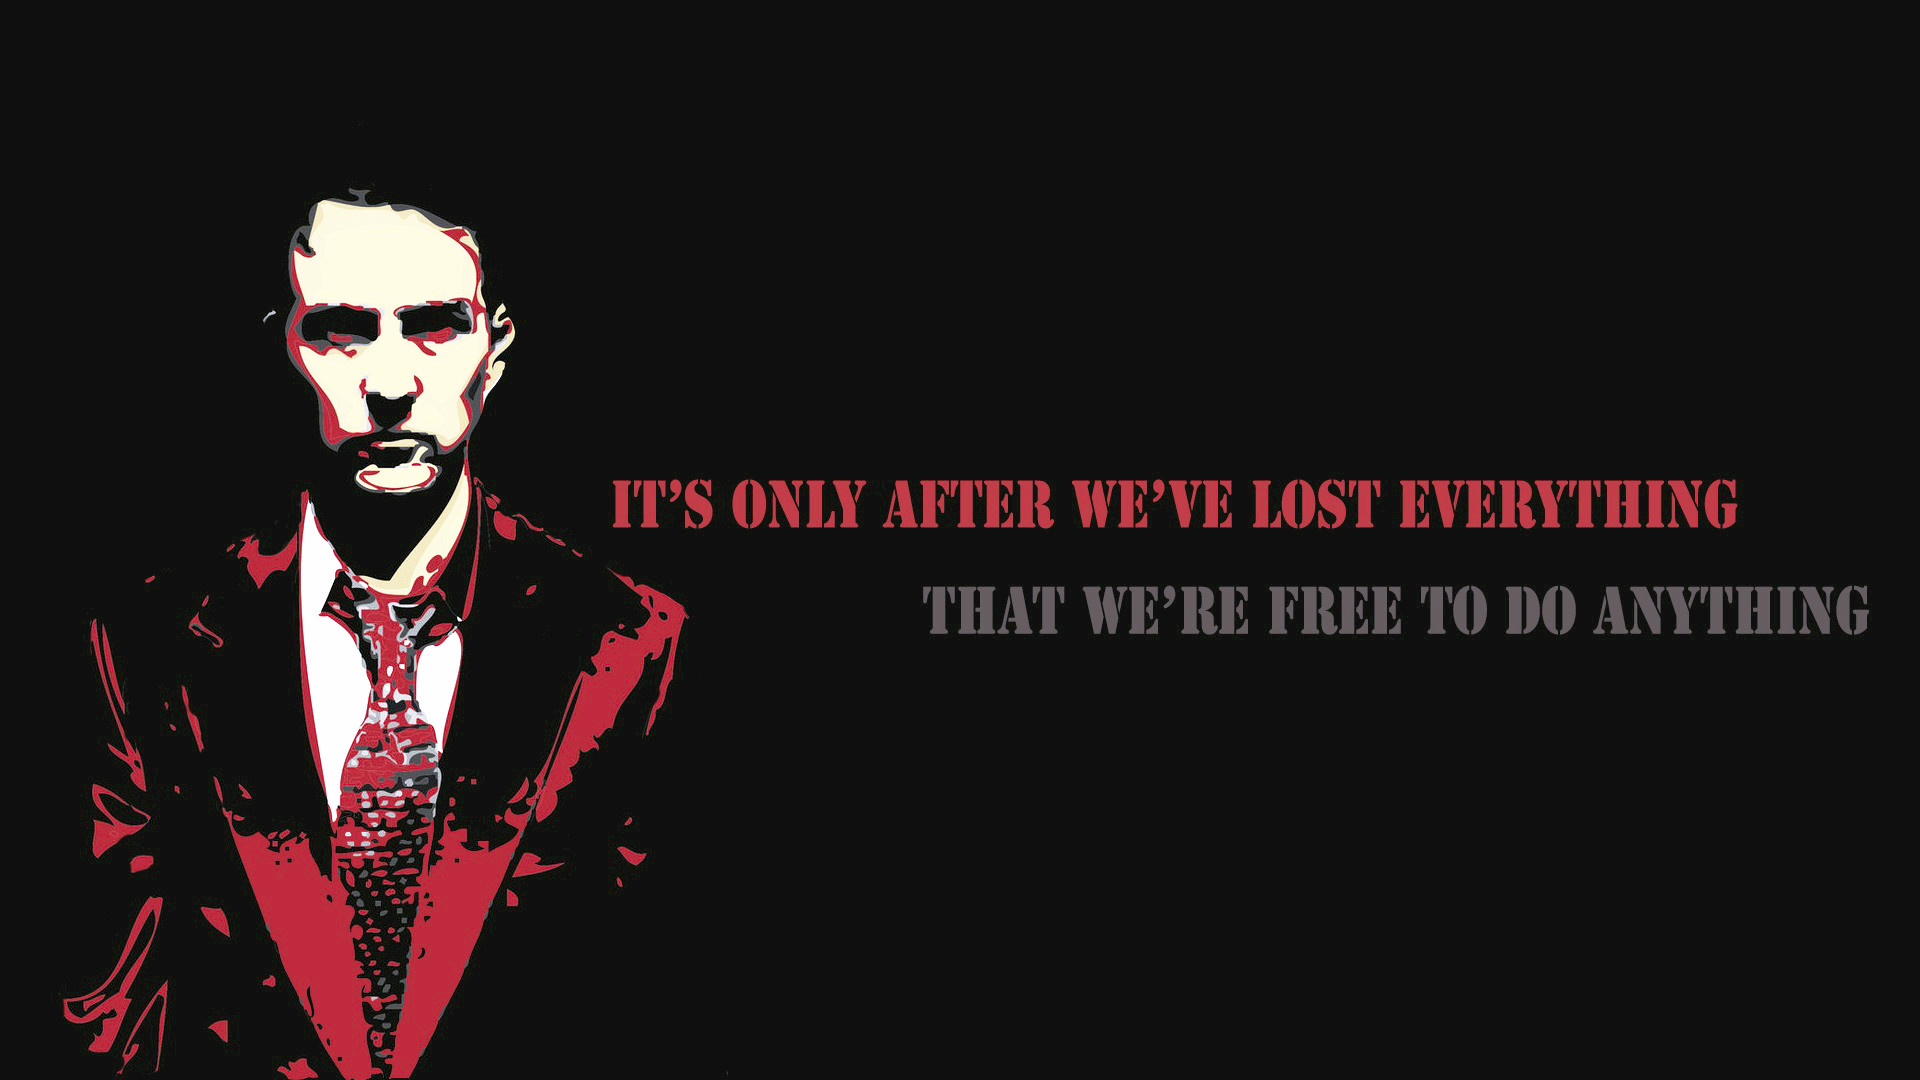 Wallpaper.wiki hd fight club movie wallpapers pic wpd006882edited